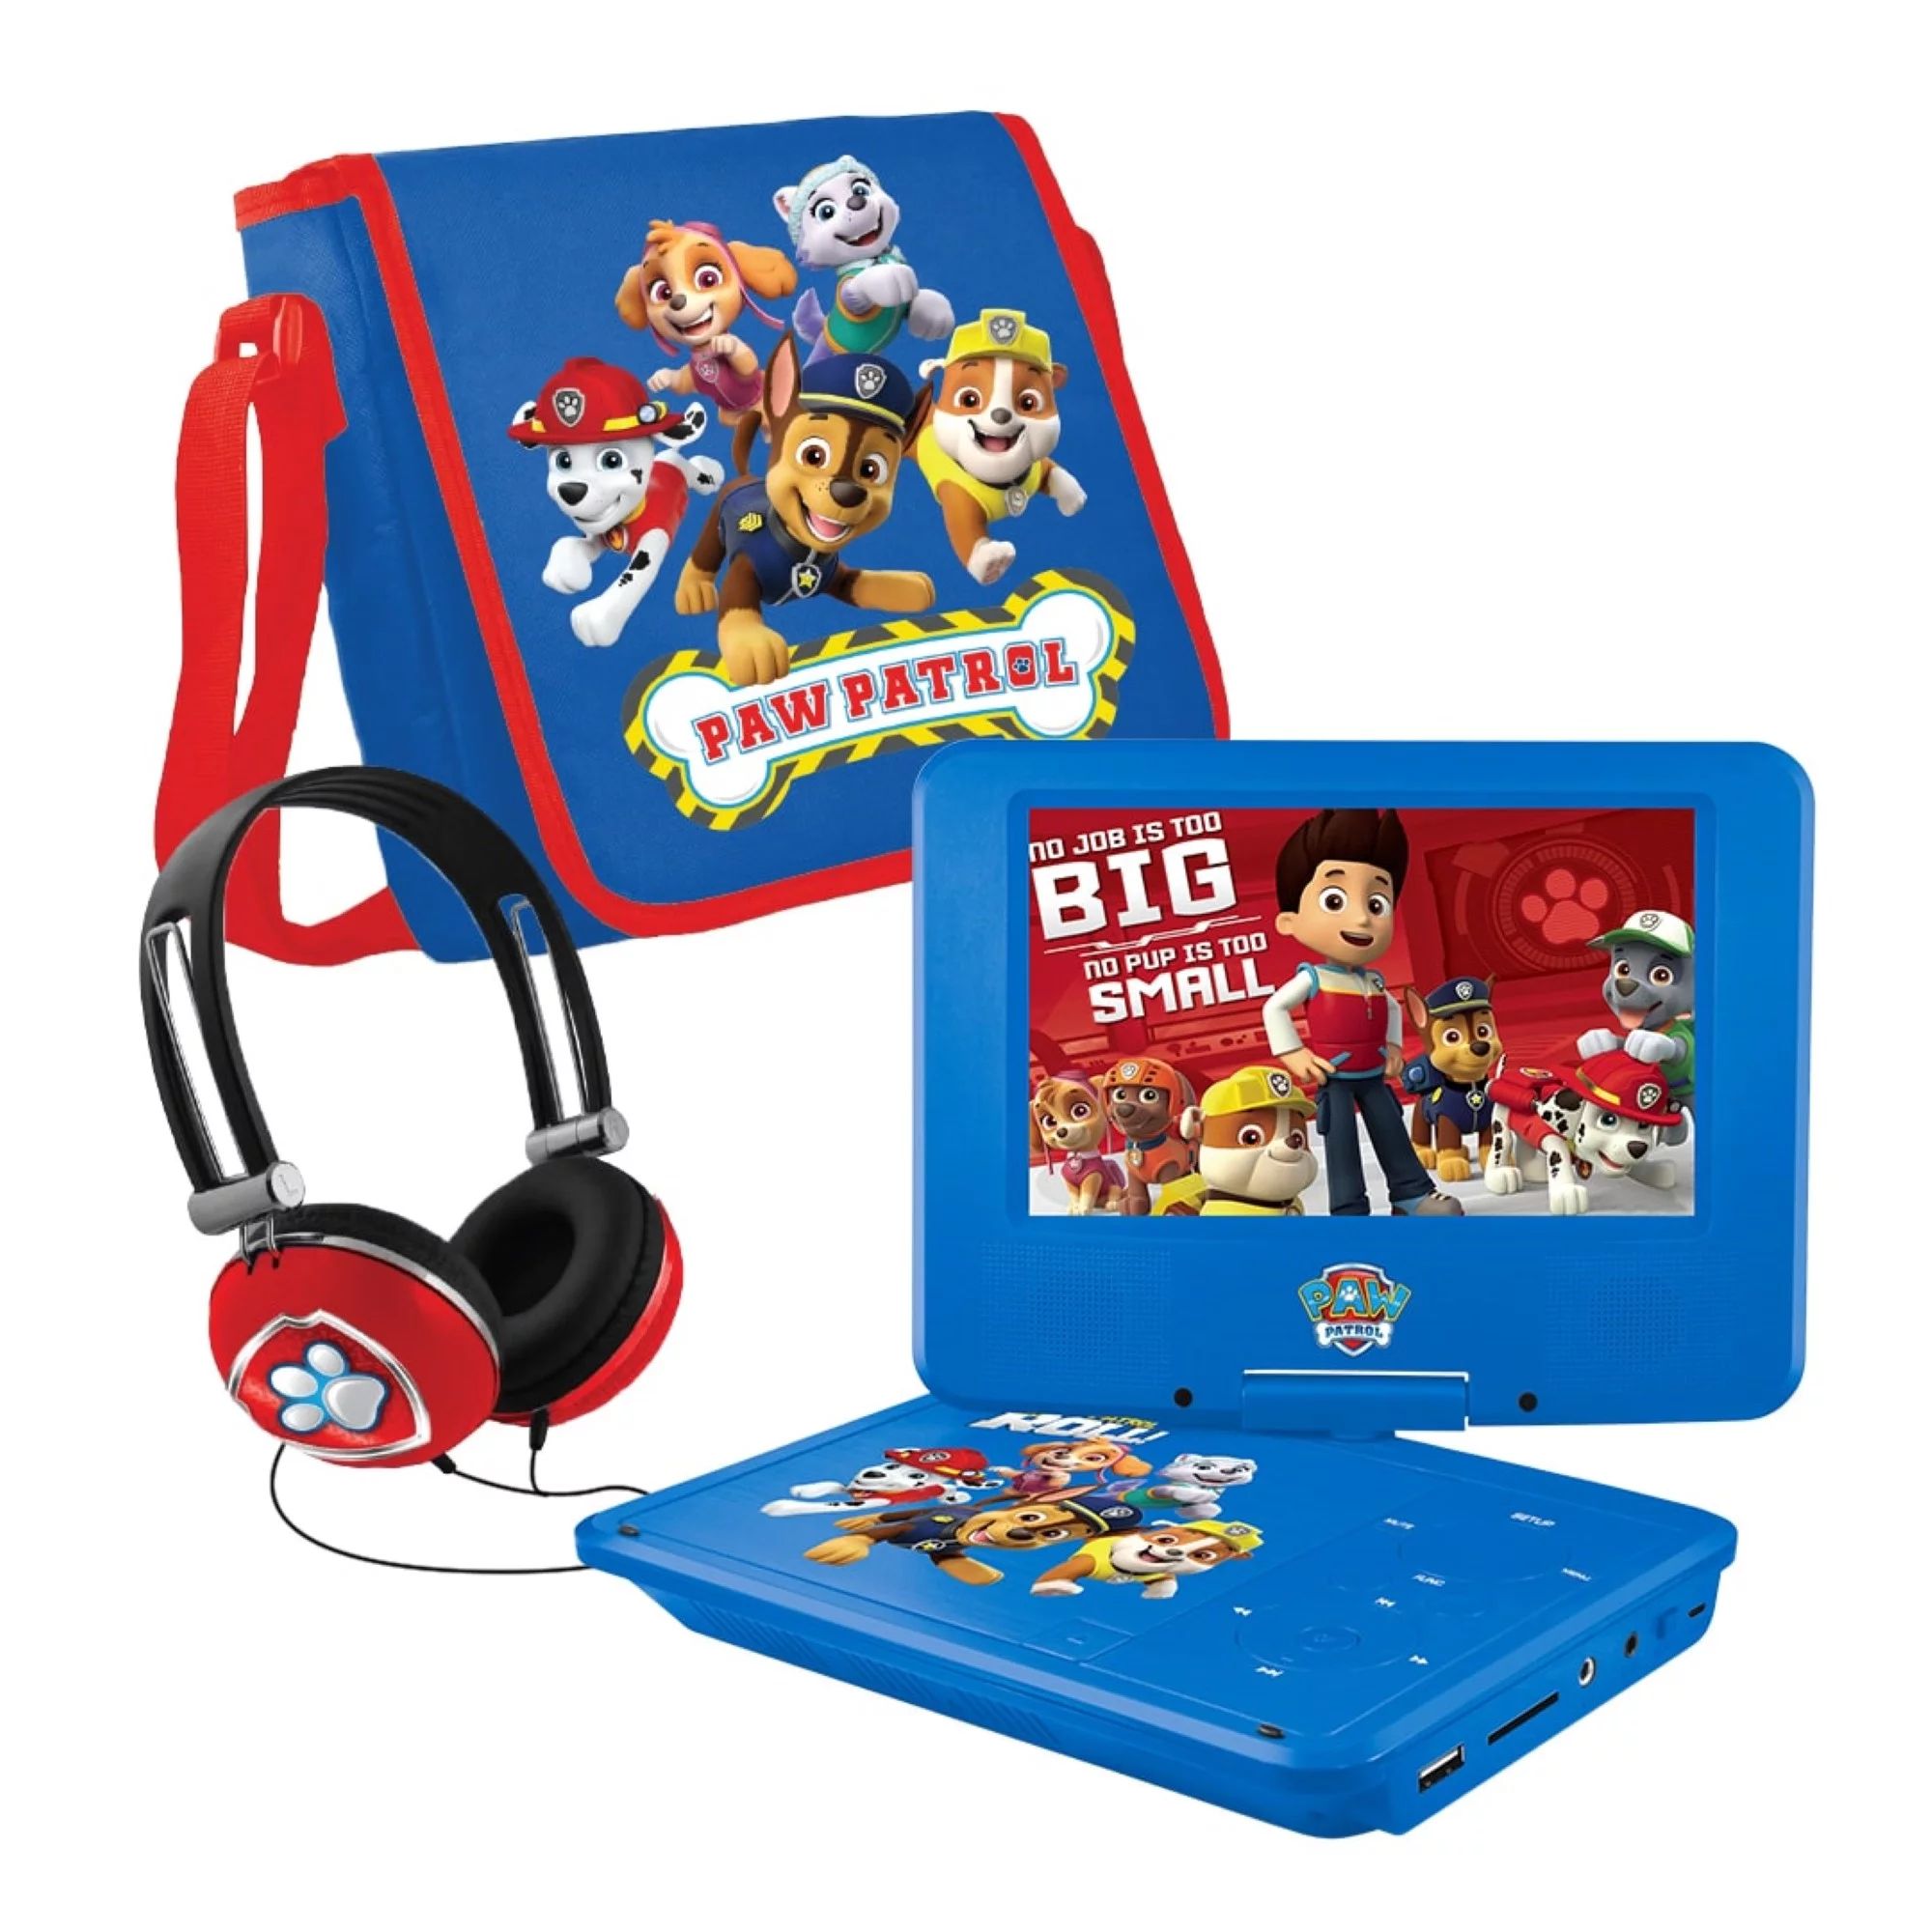 PAW Patrol NKPDVD700CH 7" Portable DVD Player with Headphones + Carrying Bag - Blue | Walmart (US)